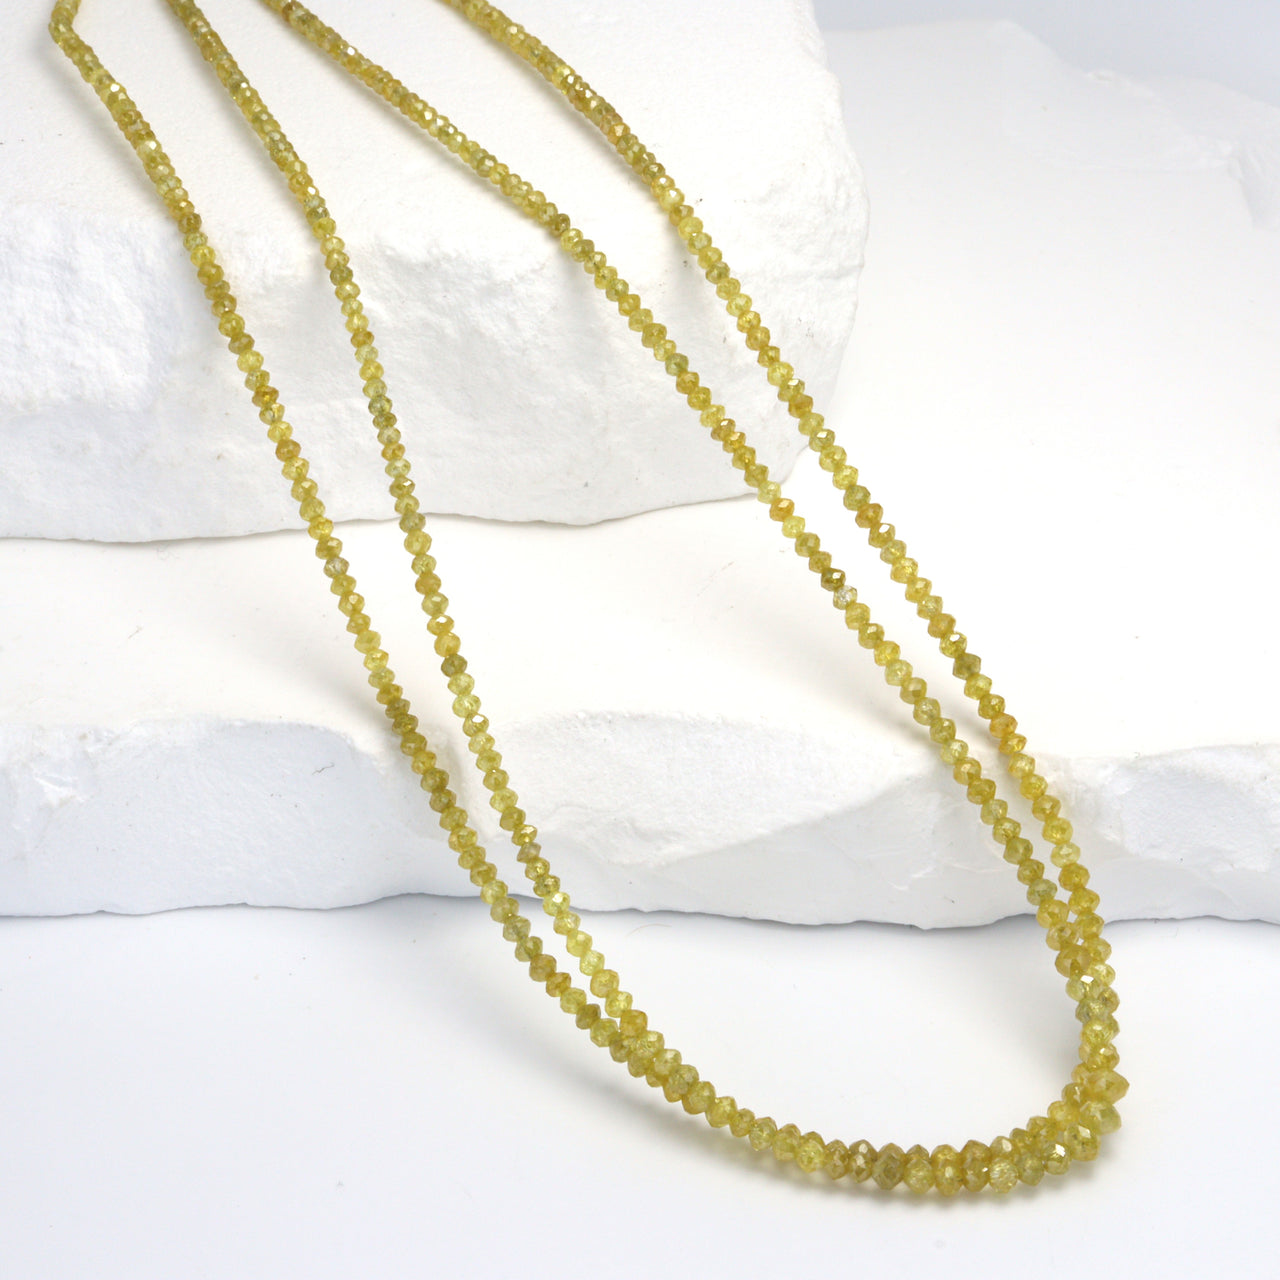 Yellow Diamond 1.7mm Faceted Rondelles